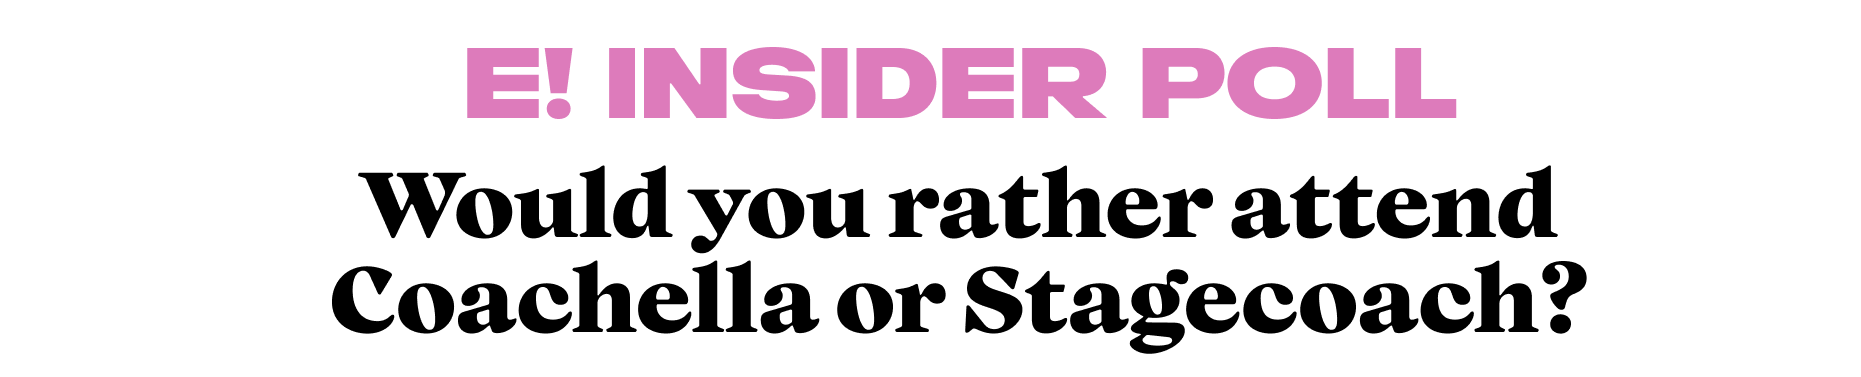 Would you rather attend Coachella or Stagecoach?